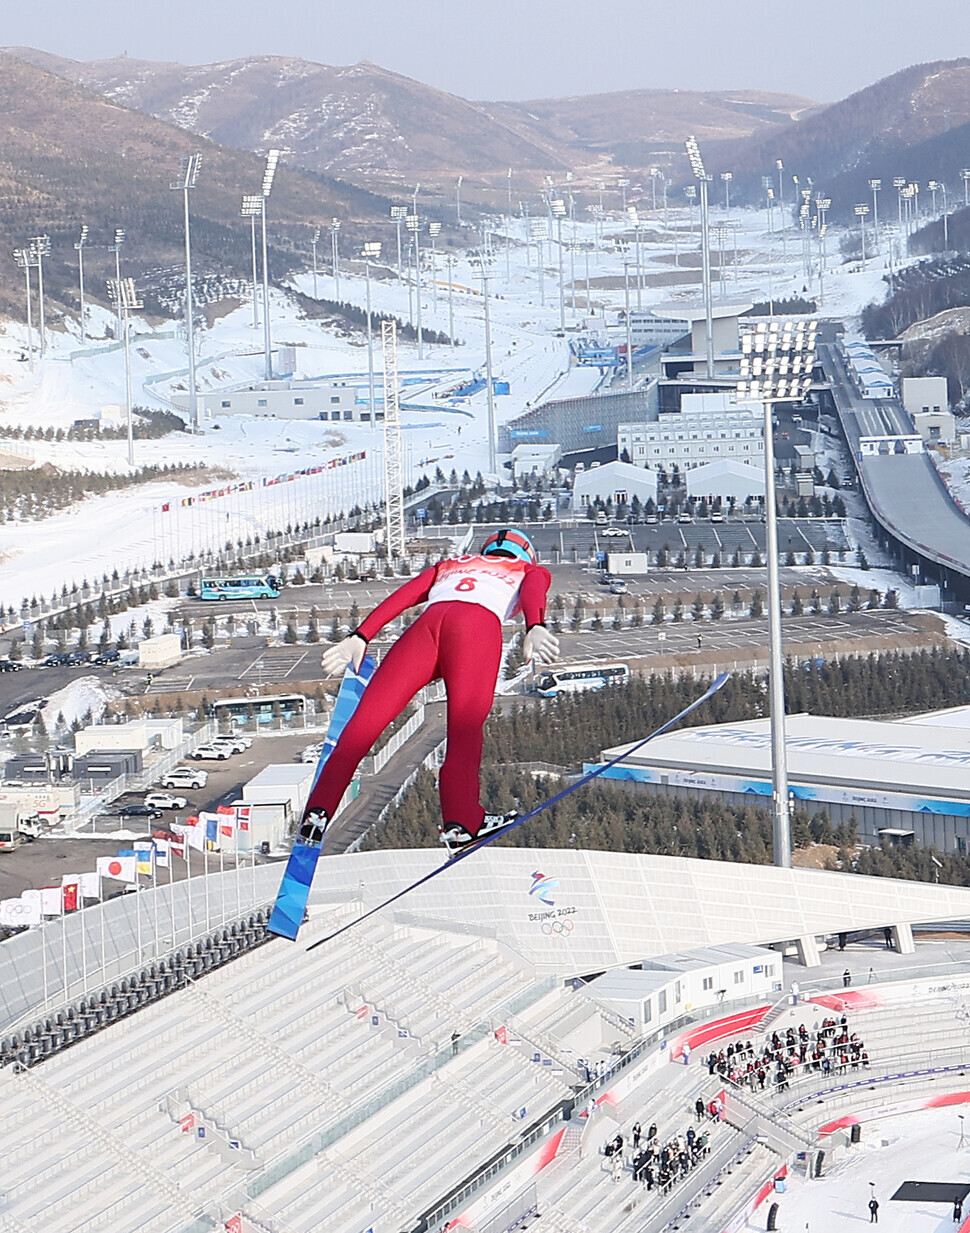 South Korea’s skier Park Je-un practices at the skiing center in Zhangjiakou on Wednesday. All of the snow used at the Beijing Winter Games is artificial. (Yonhap News)